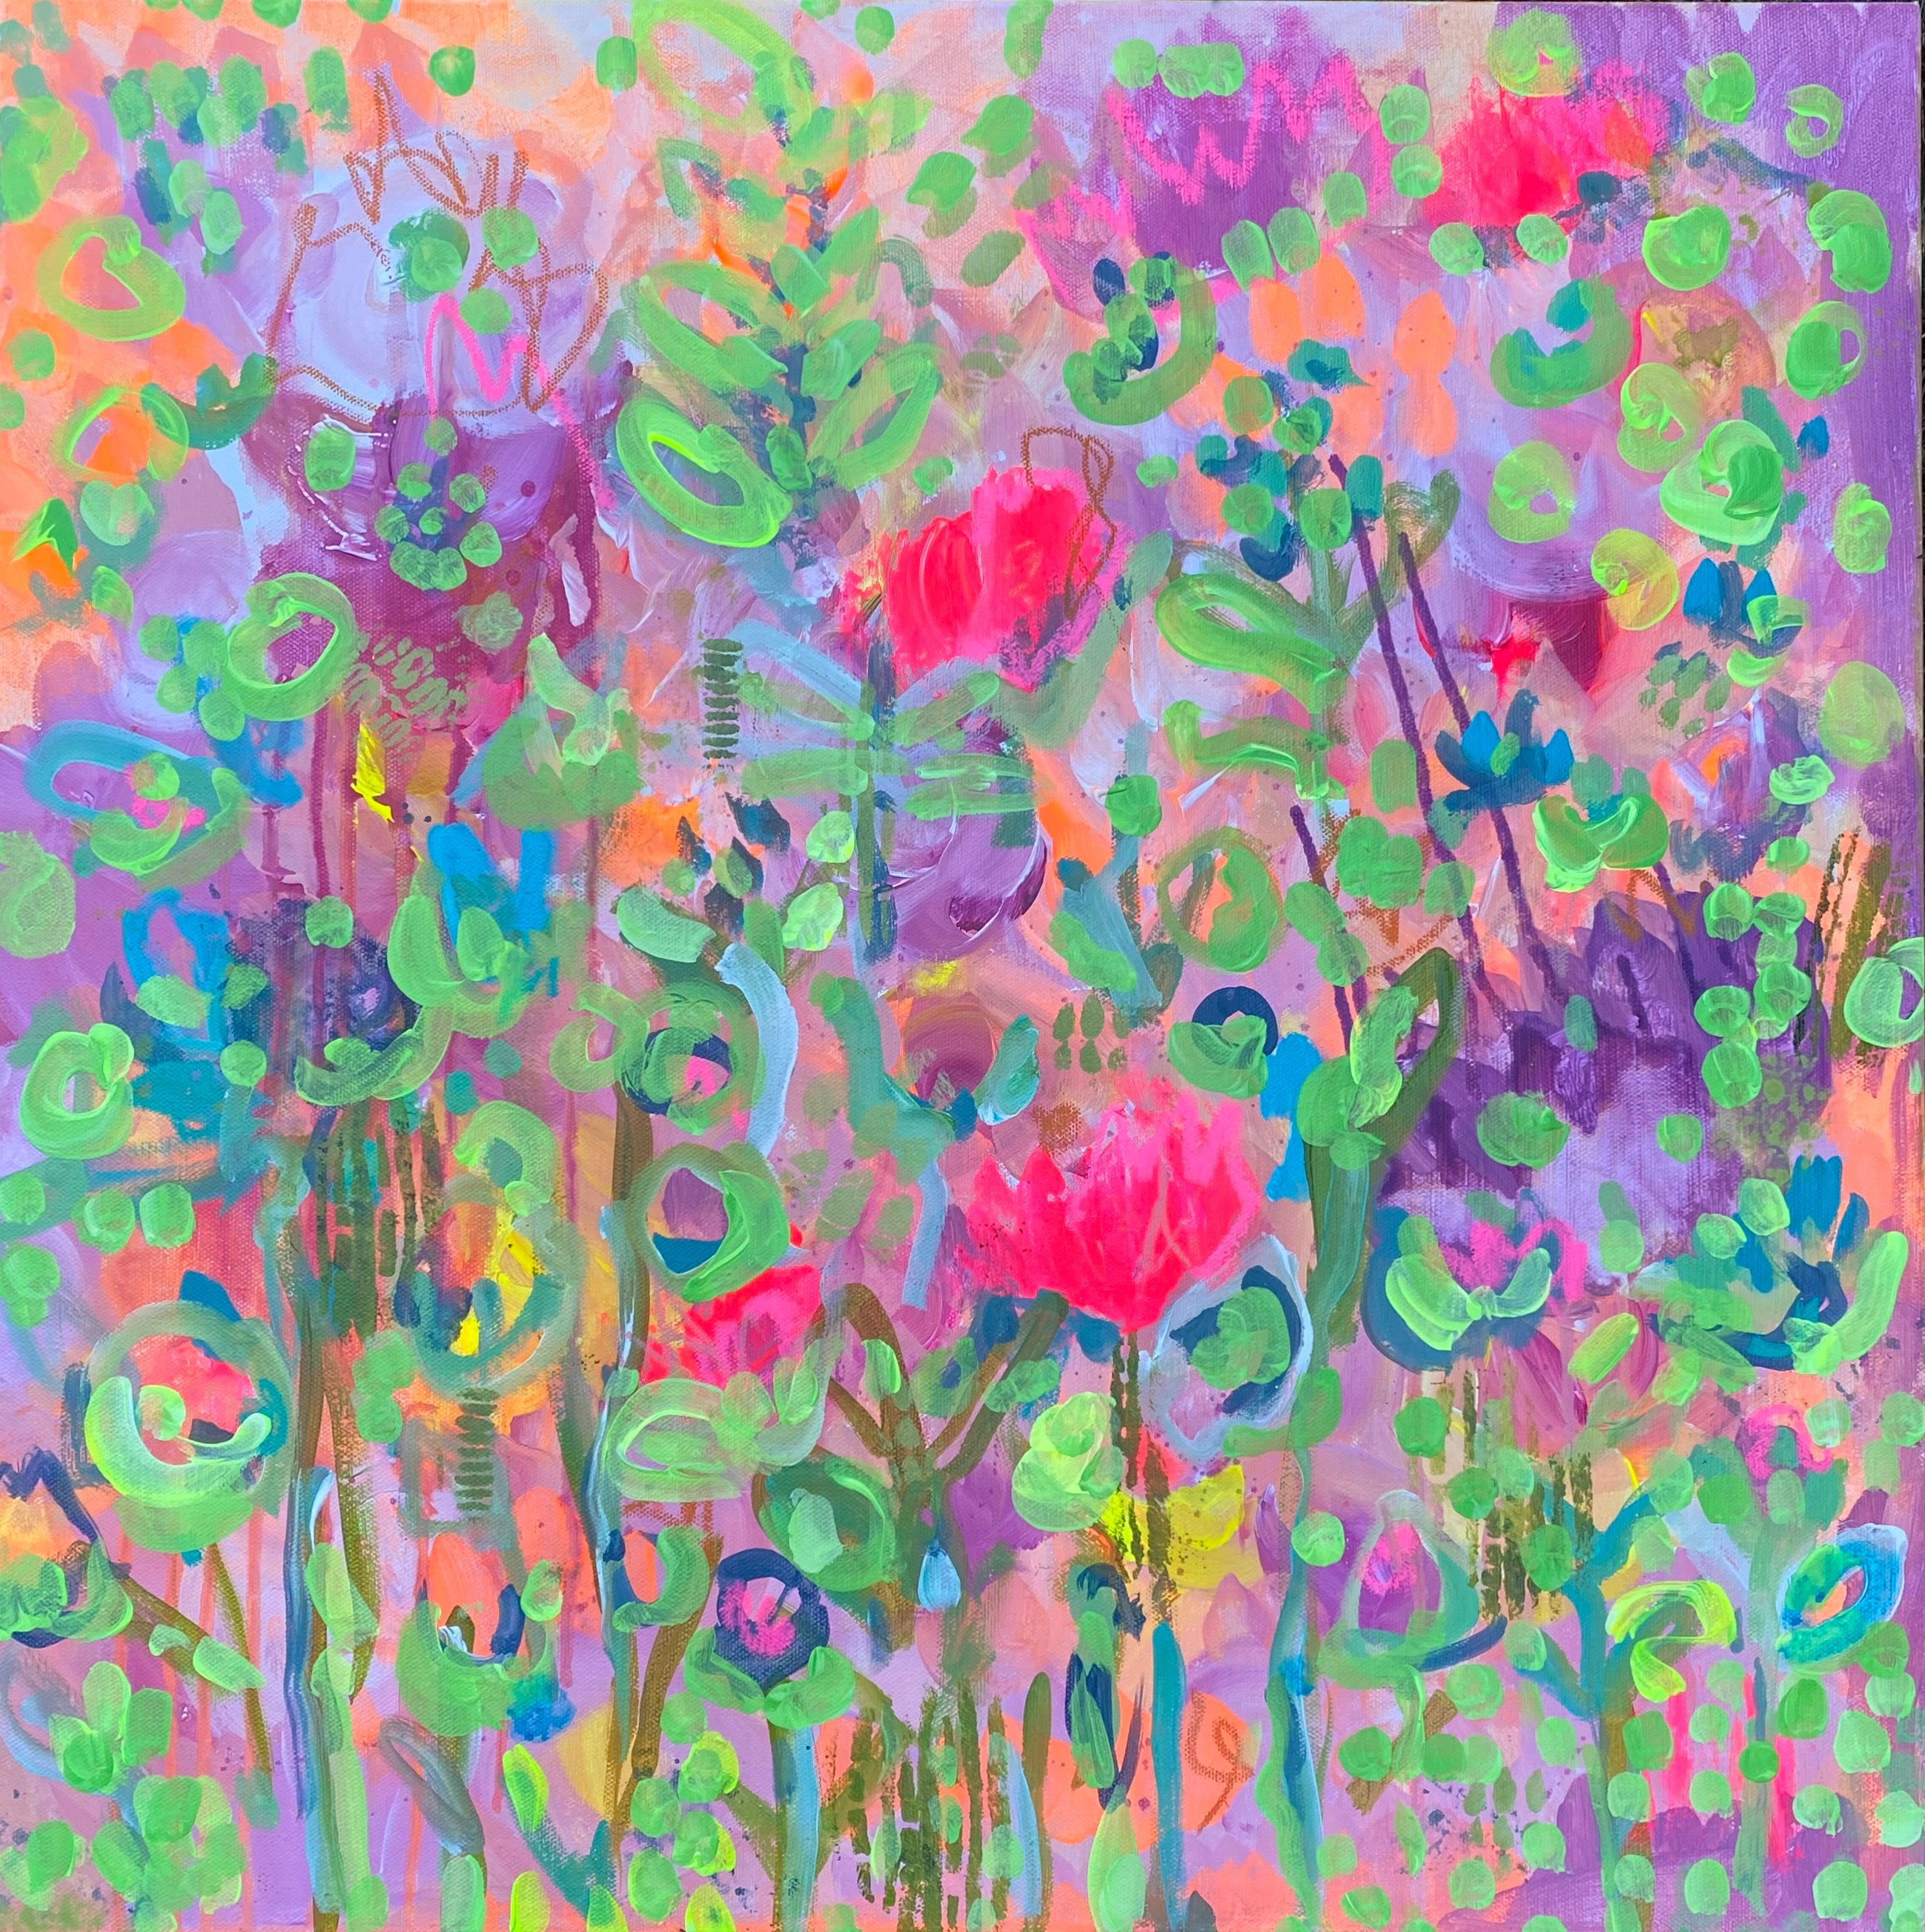 bright vibrant happy abstract floral painting by artist kate shepherd host of the creative genius podcast